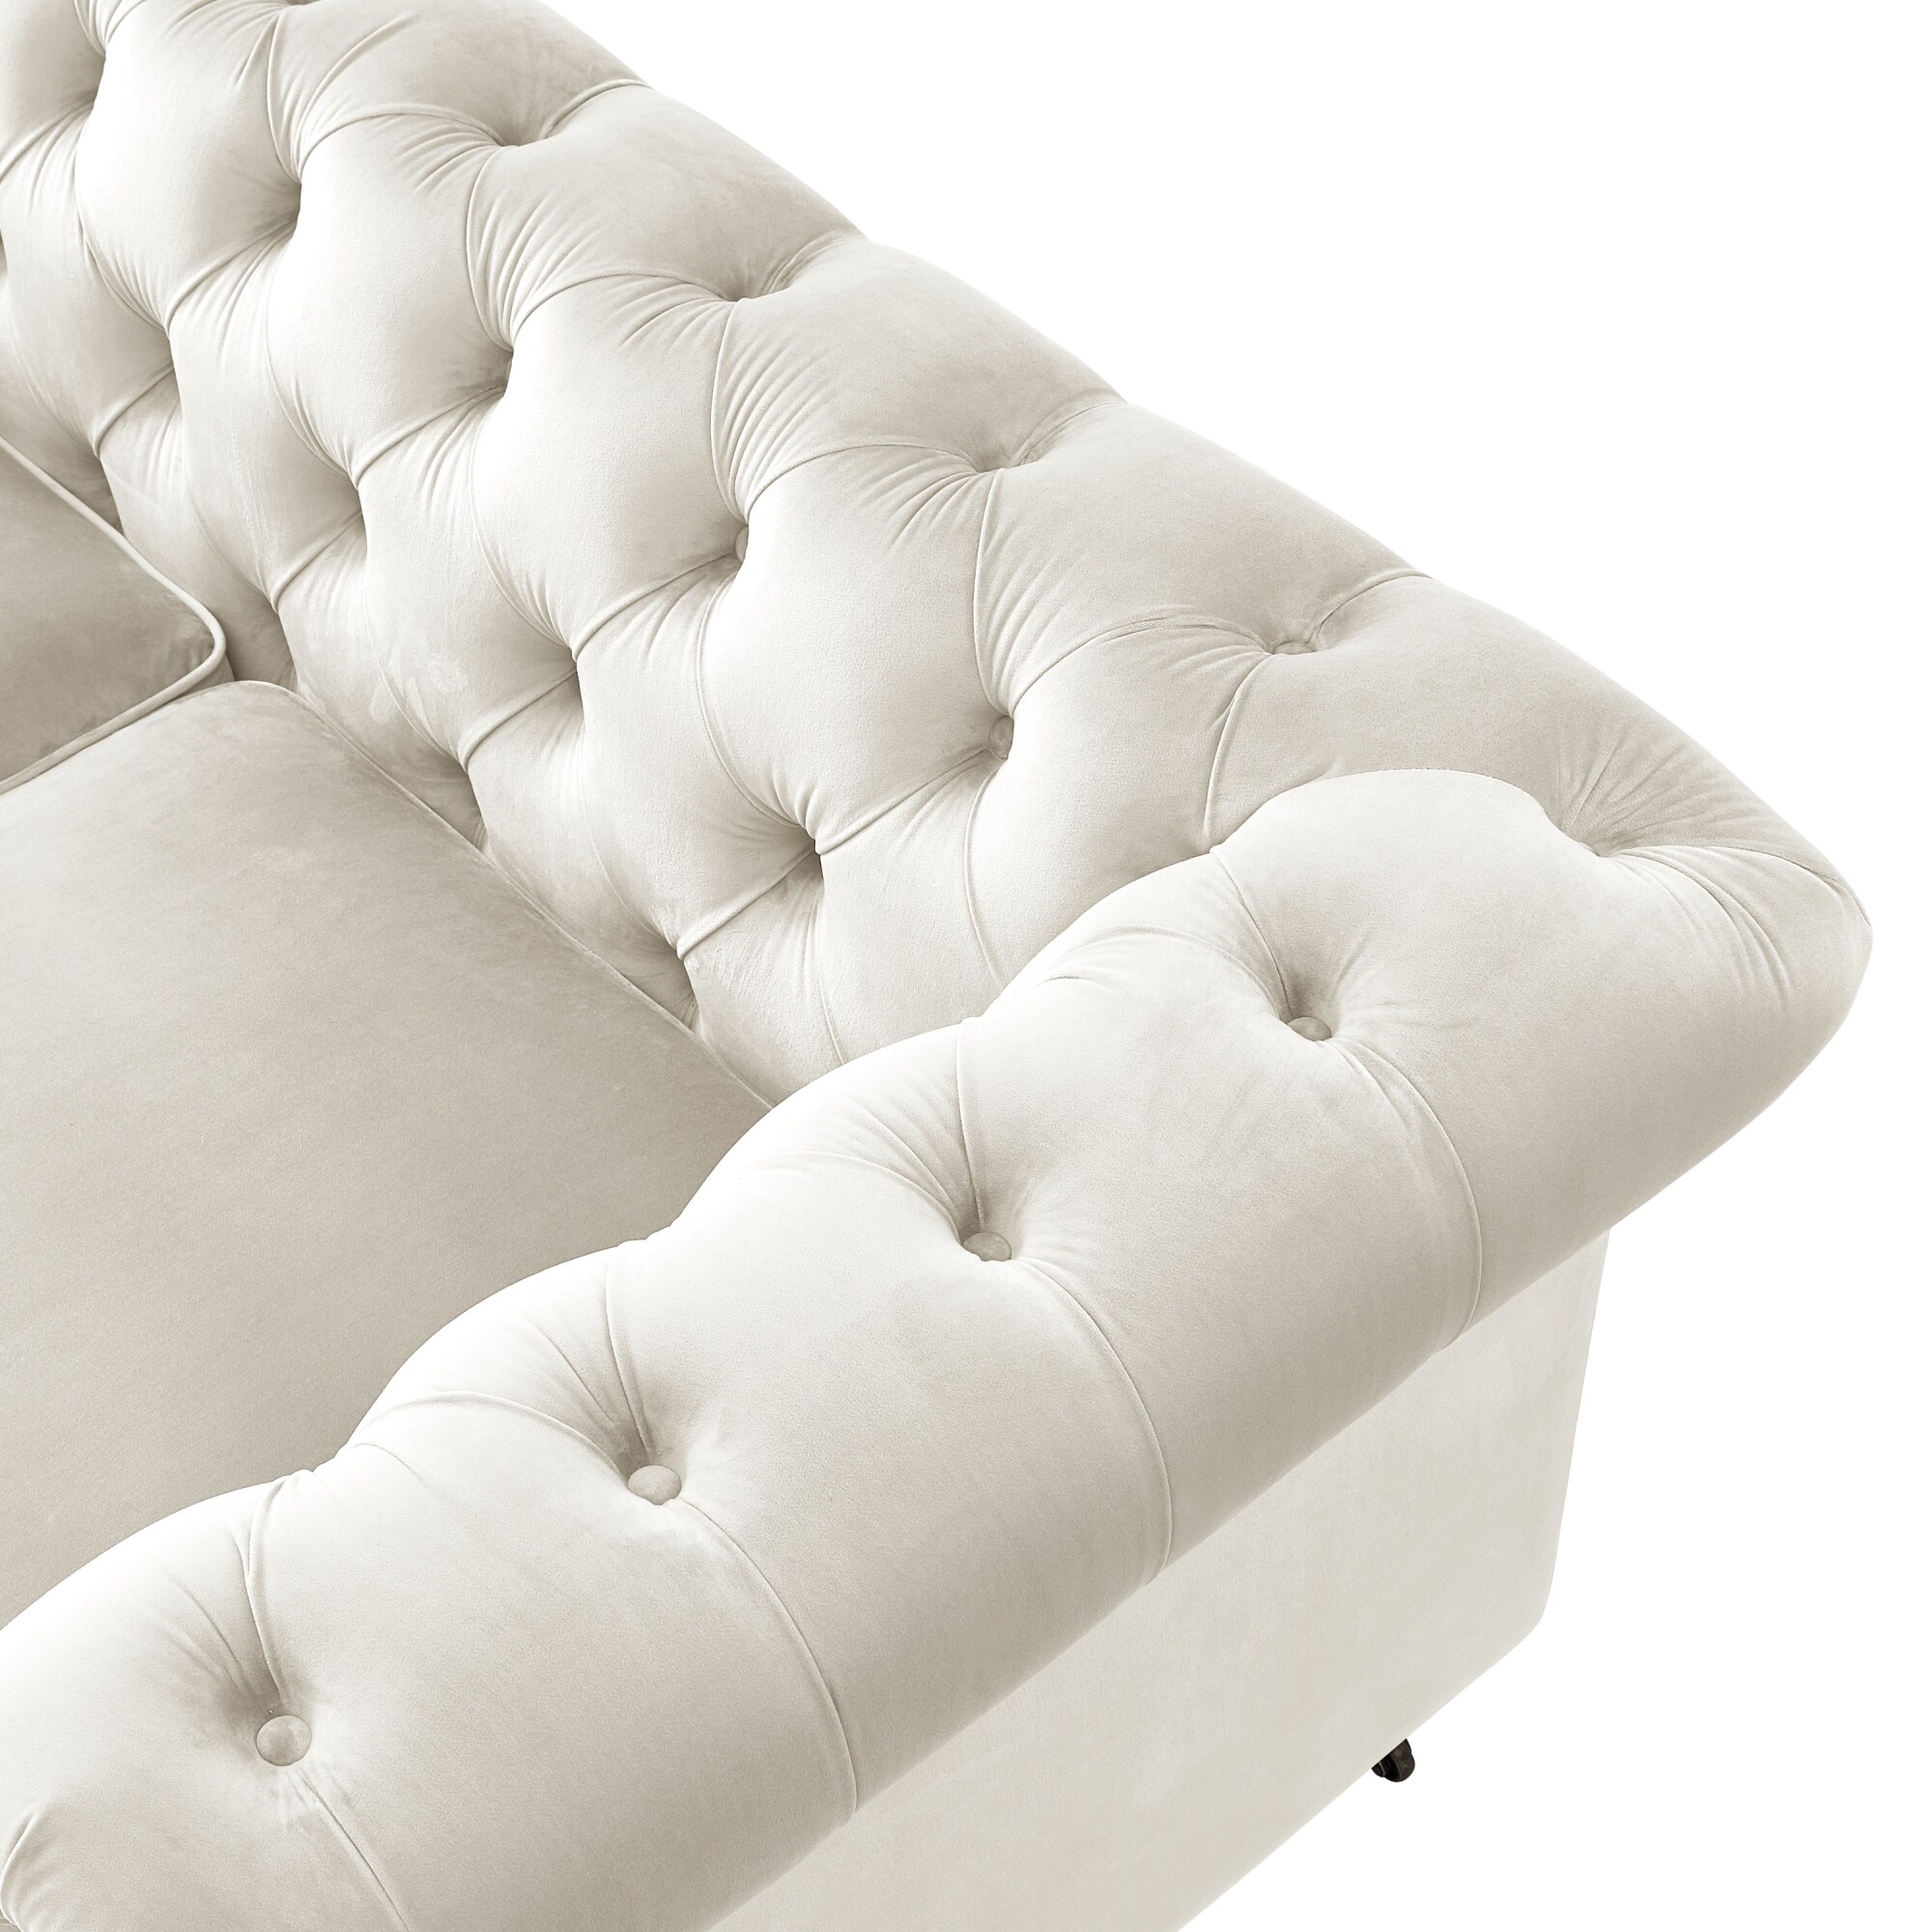 Kaylani Button Tufted Loveseat with Casters - 71L x 33.5W x 30.3H